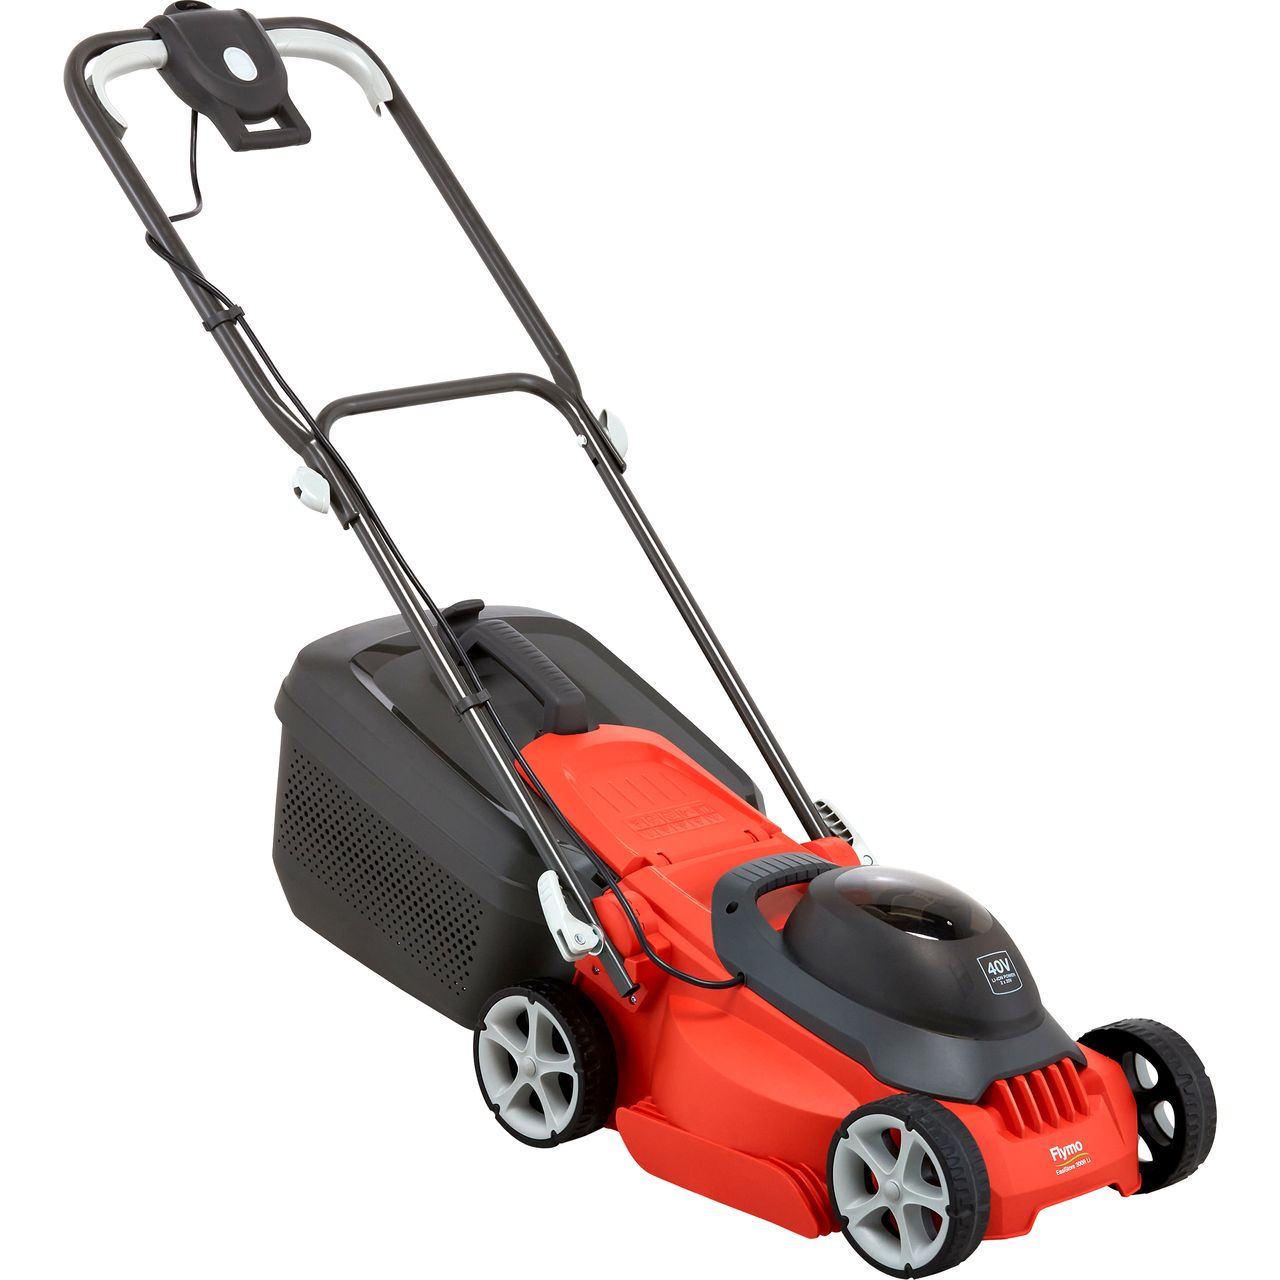 Flymo EasiStore 300R 40 Volts Cordless Lawnmower